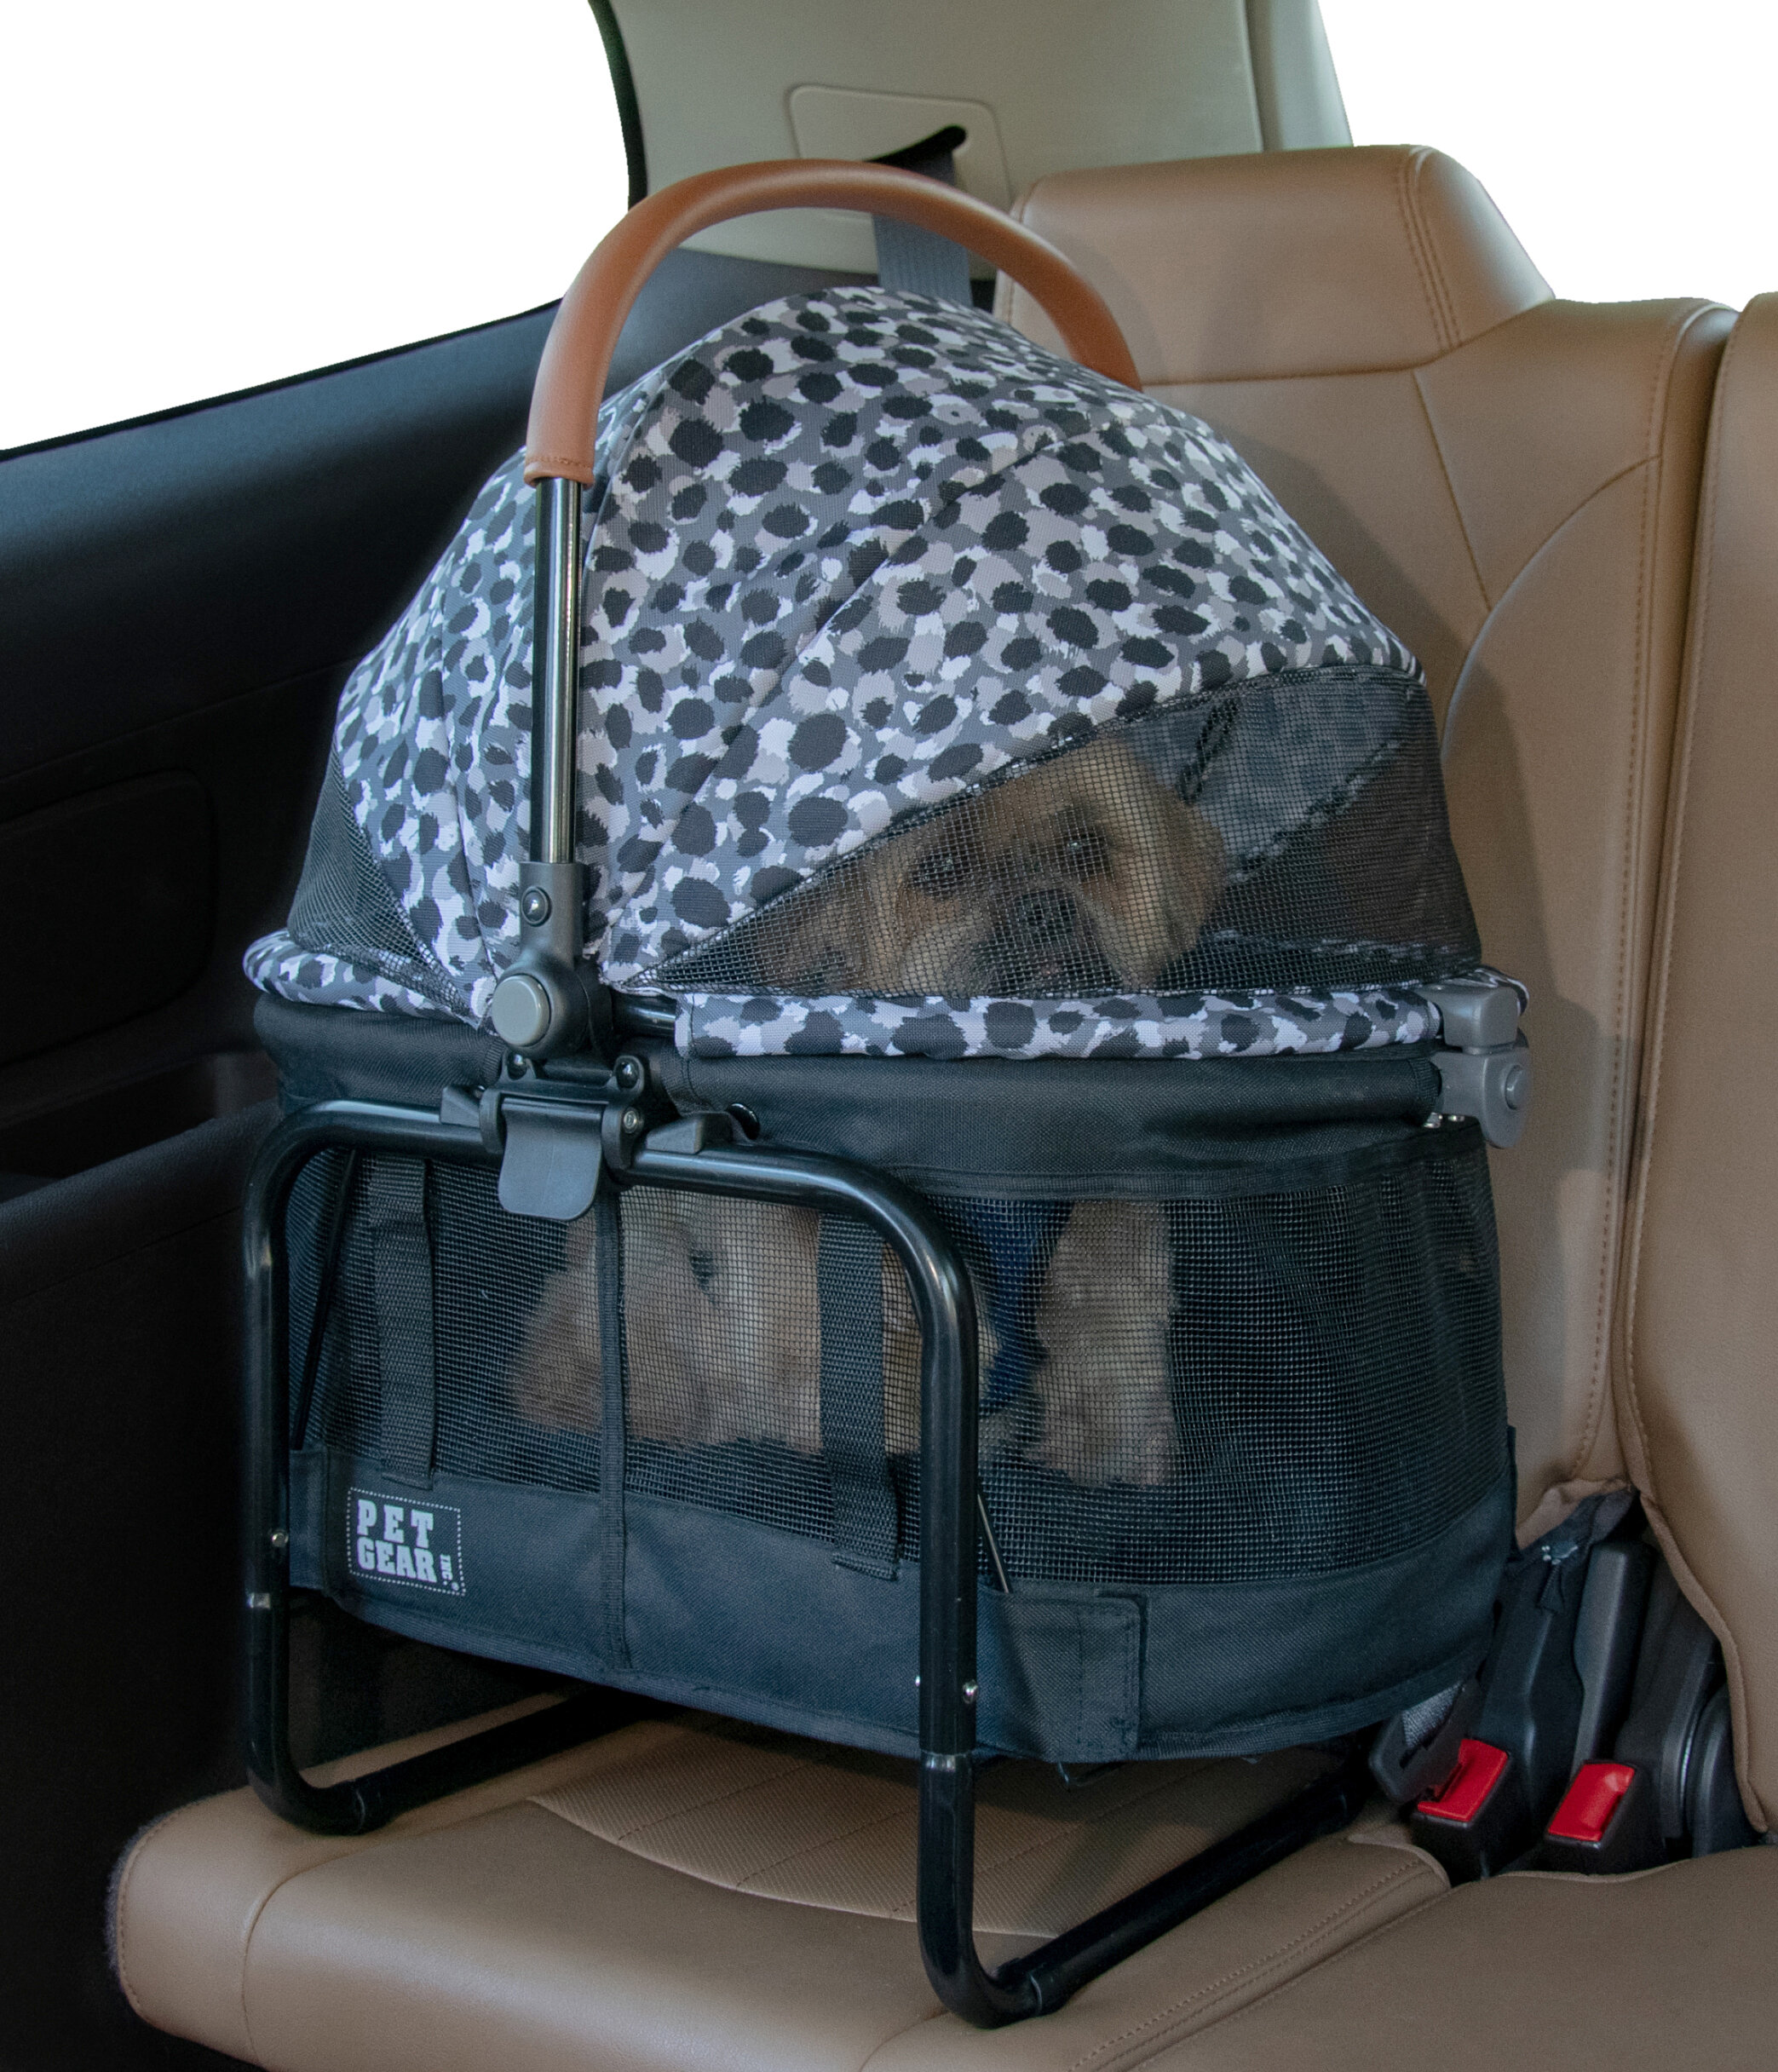 View 360 Booster Travel System Pet Carrier